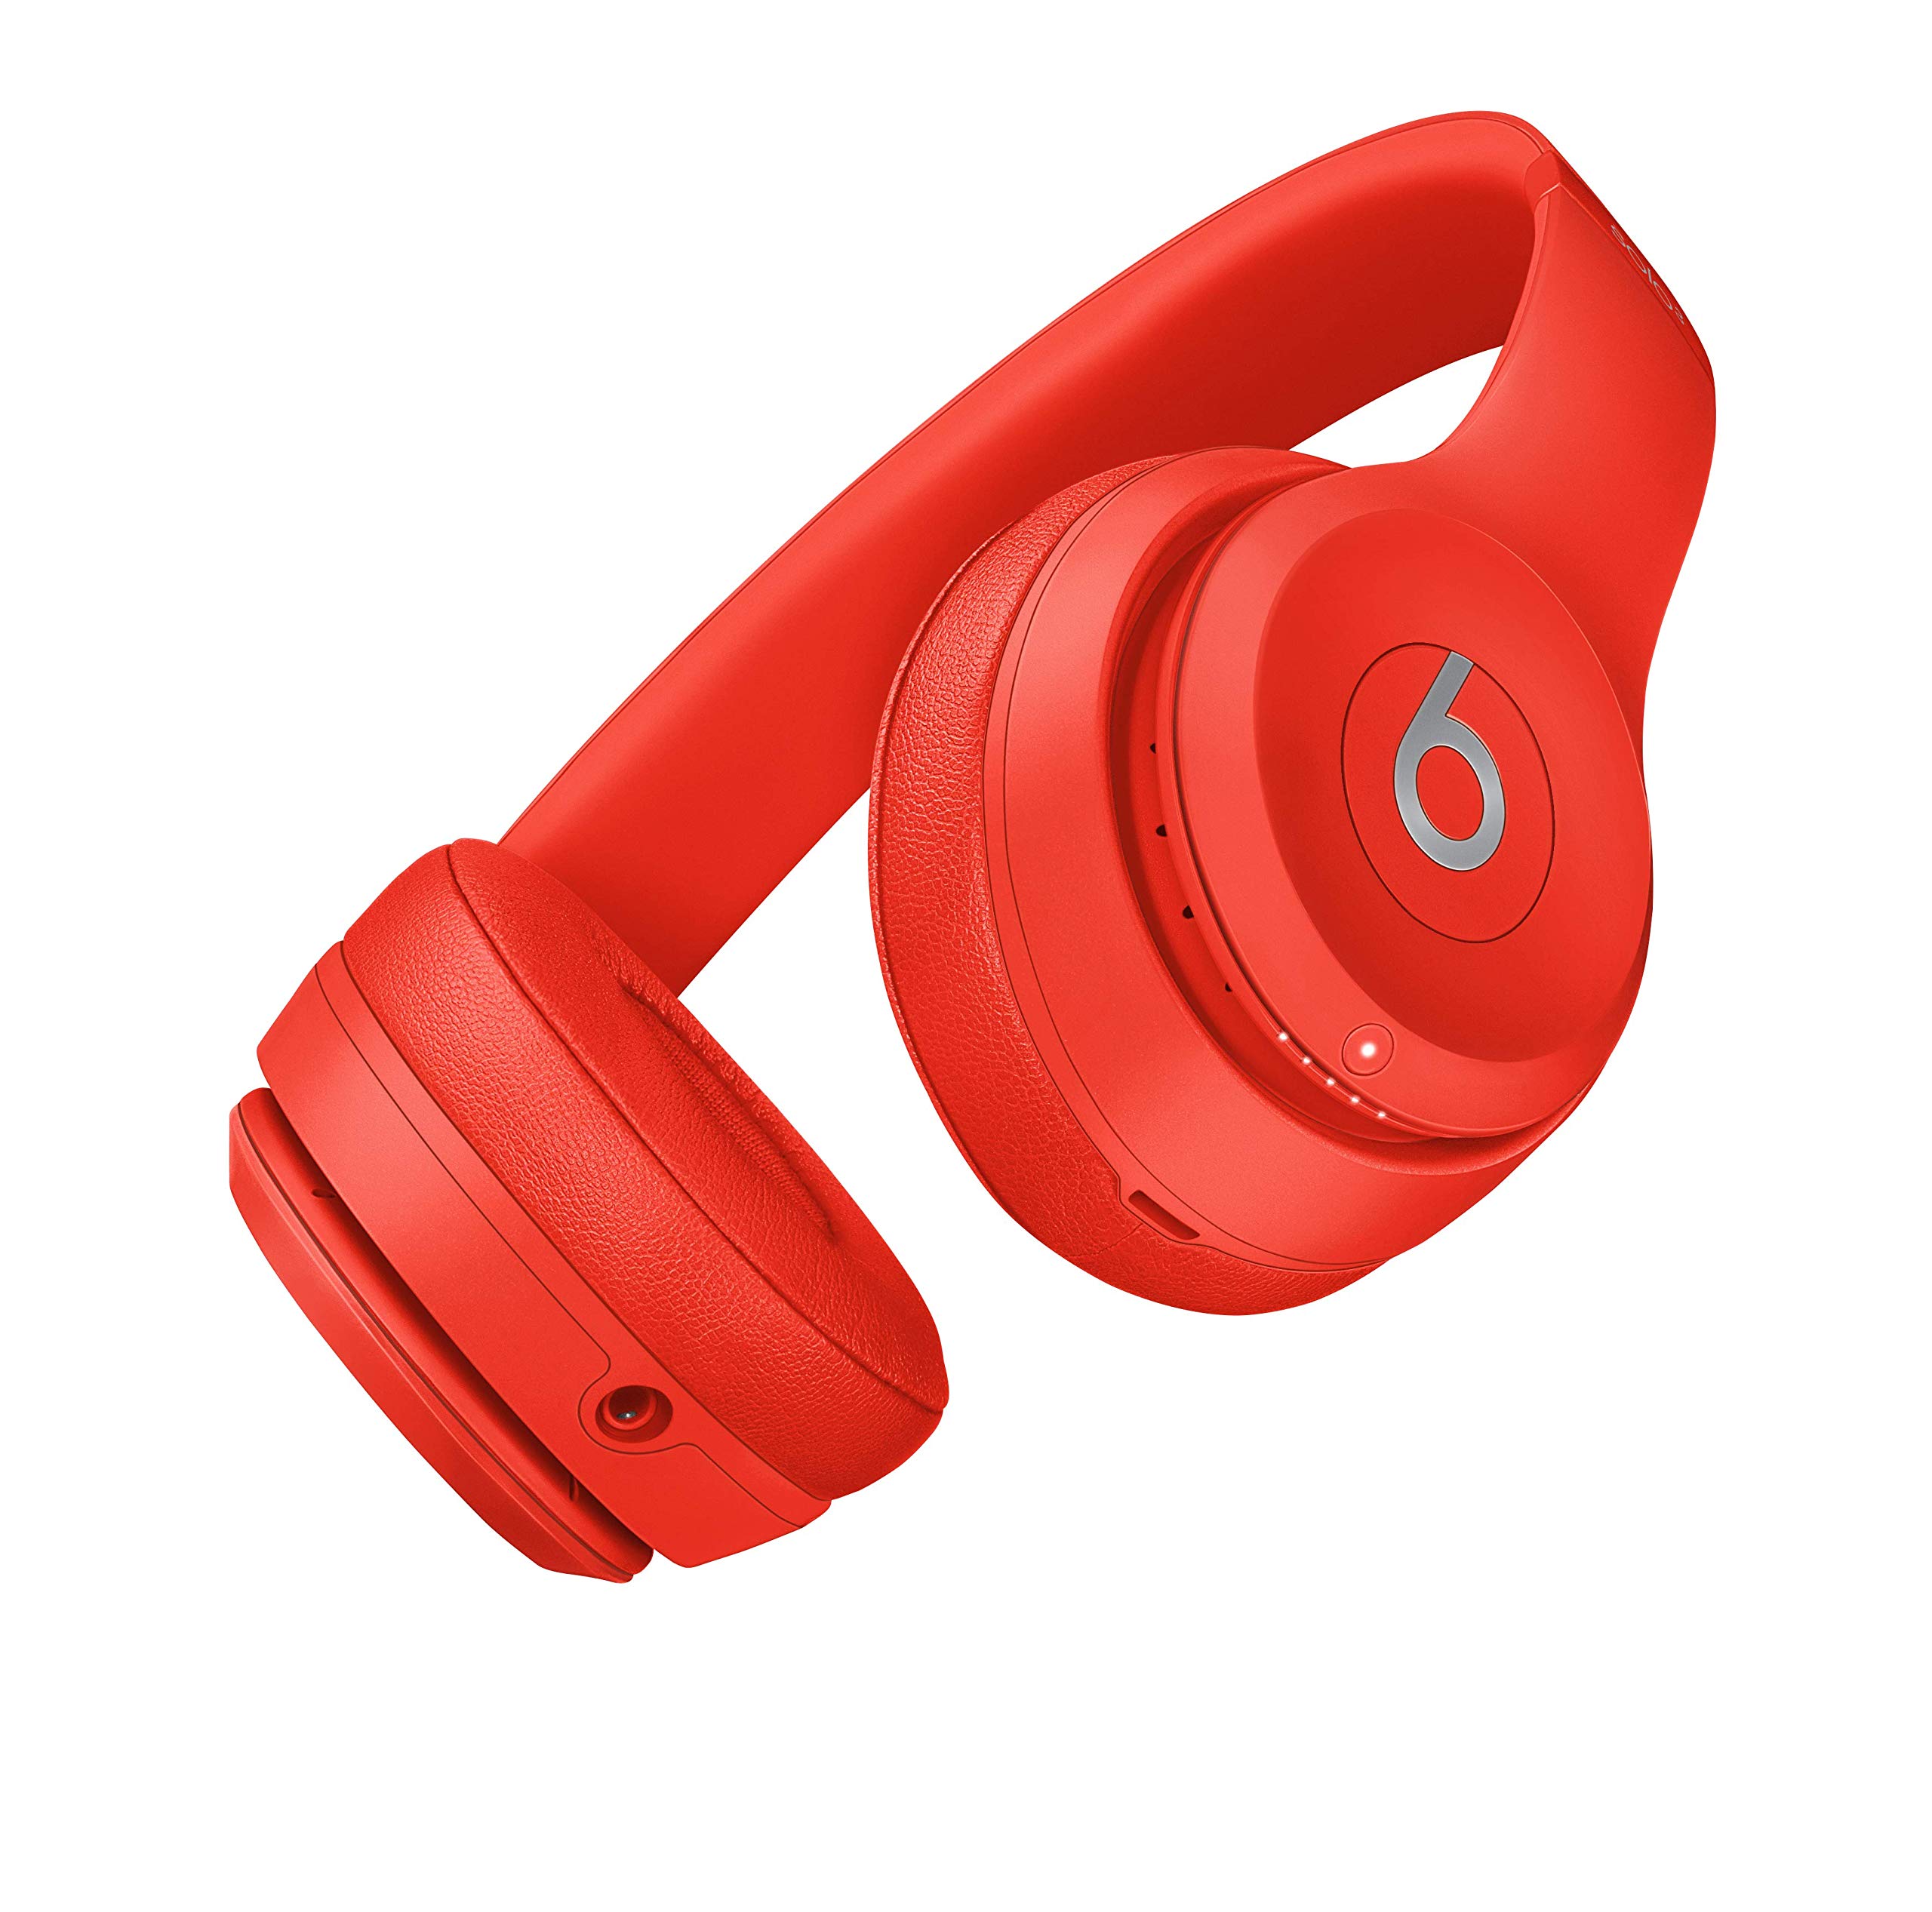 Beats Solo3 Wireless On-Ear Headphones - Apple W1 Headphone Chip, Class 1 Bluetooth, 40 Hours of Listening Time - (Product) RED (Previous Model)